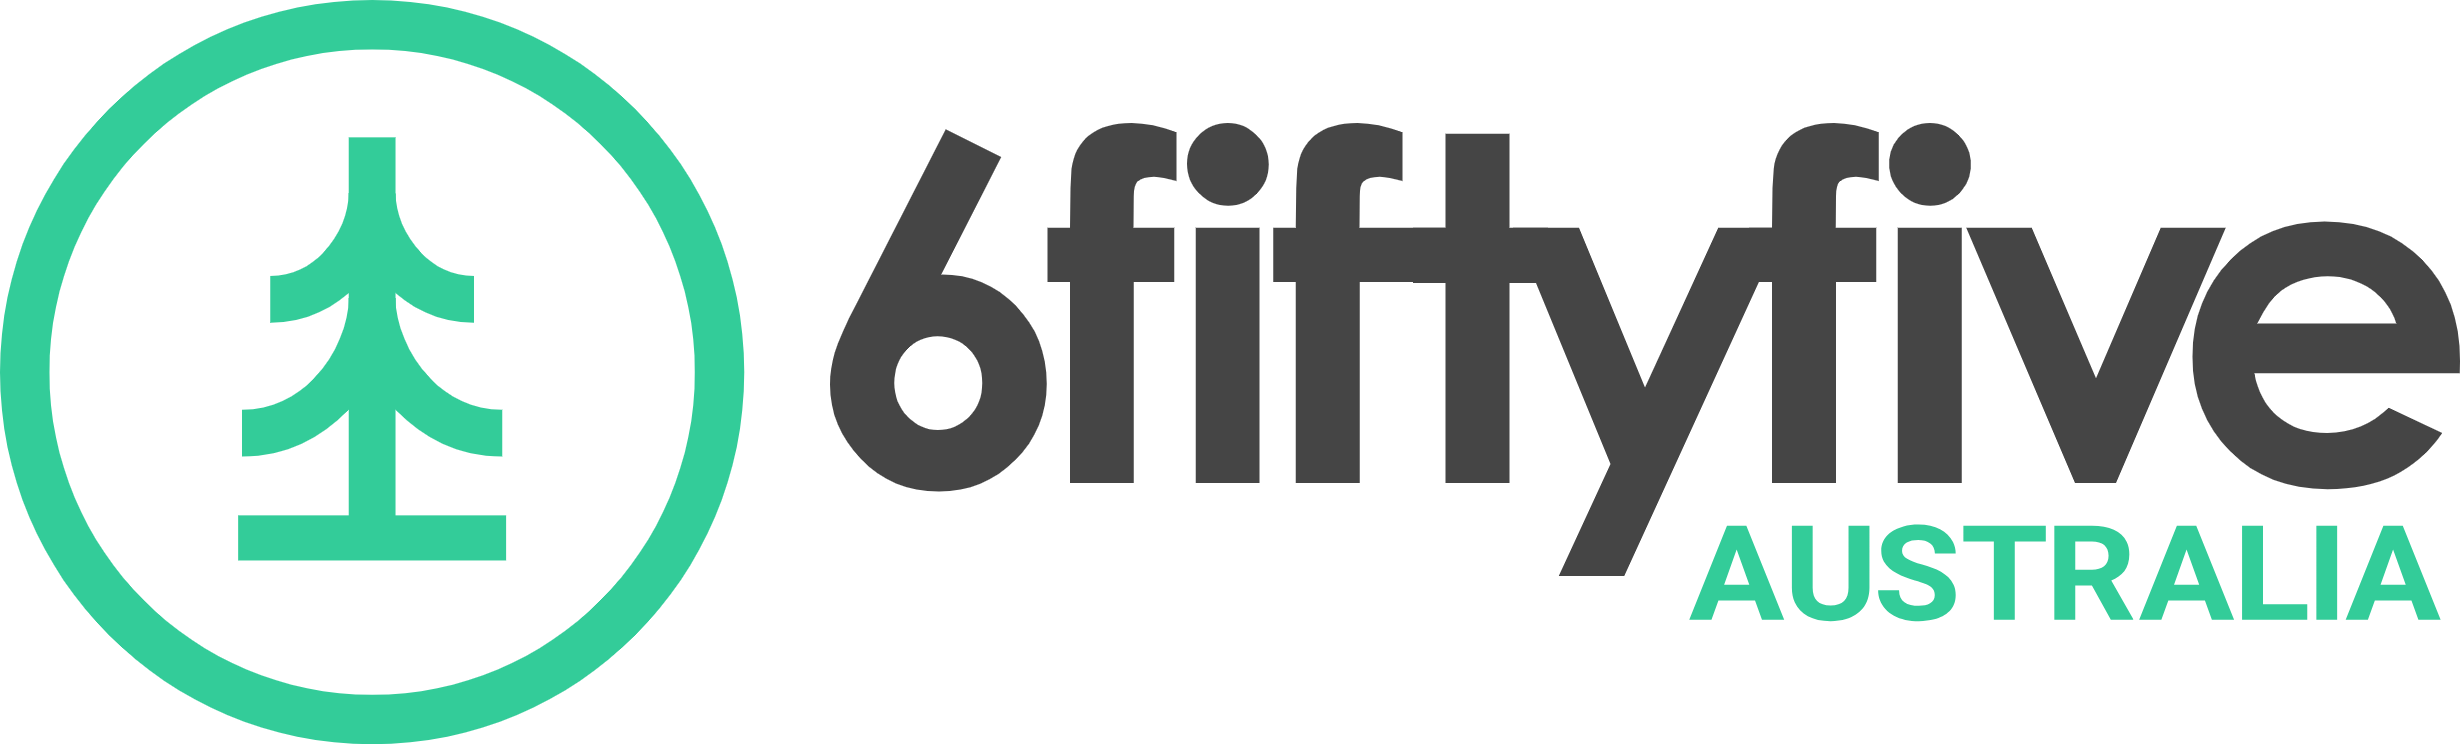 6fiftyfive